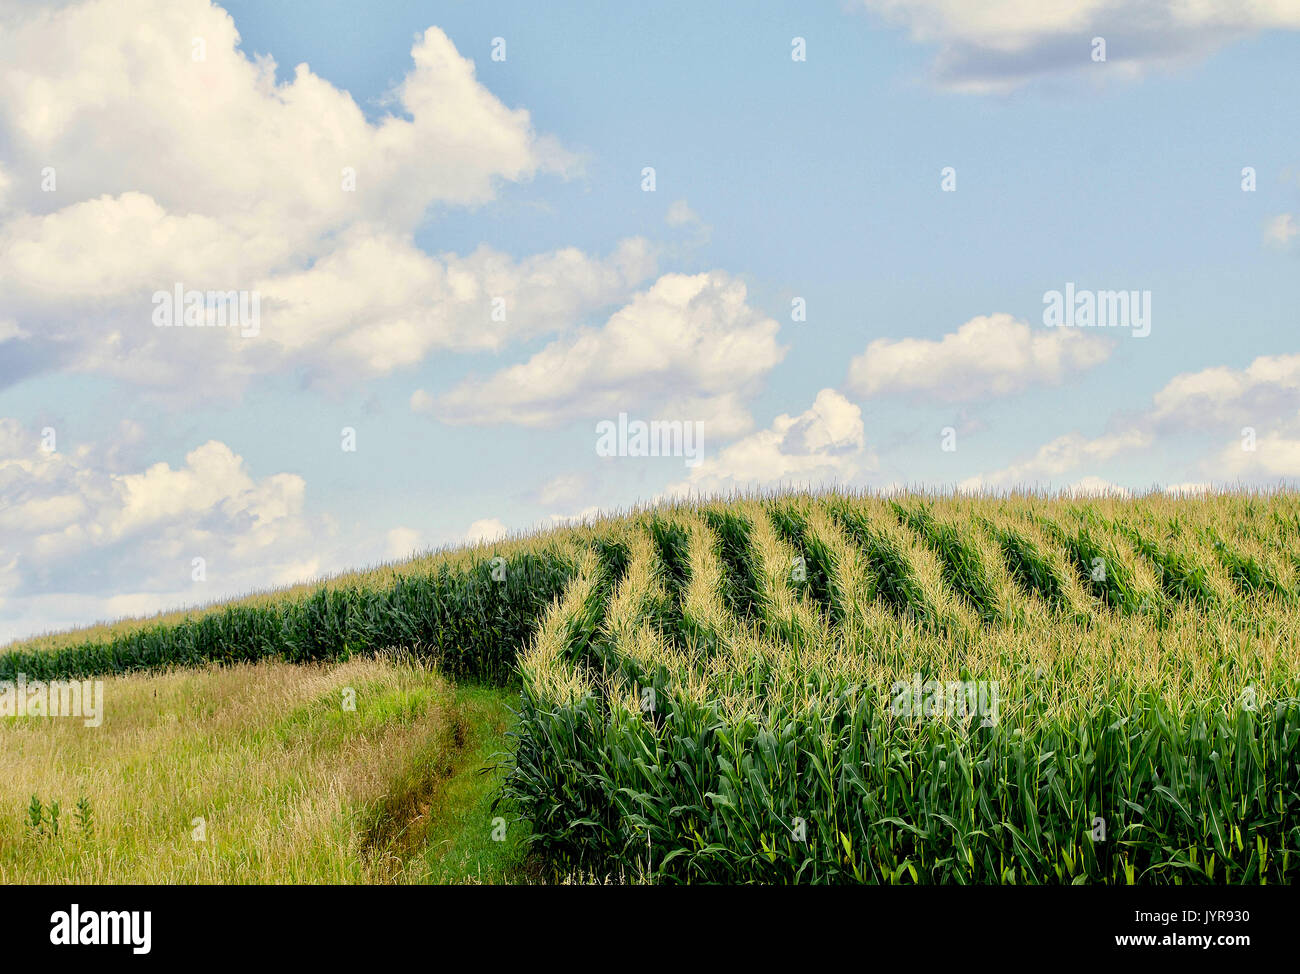 Curved rows of corn on a hillside Stock Photo